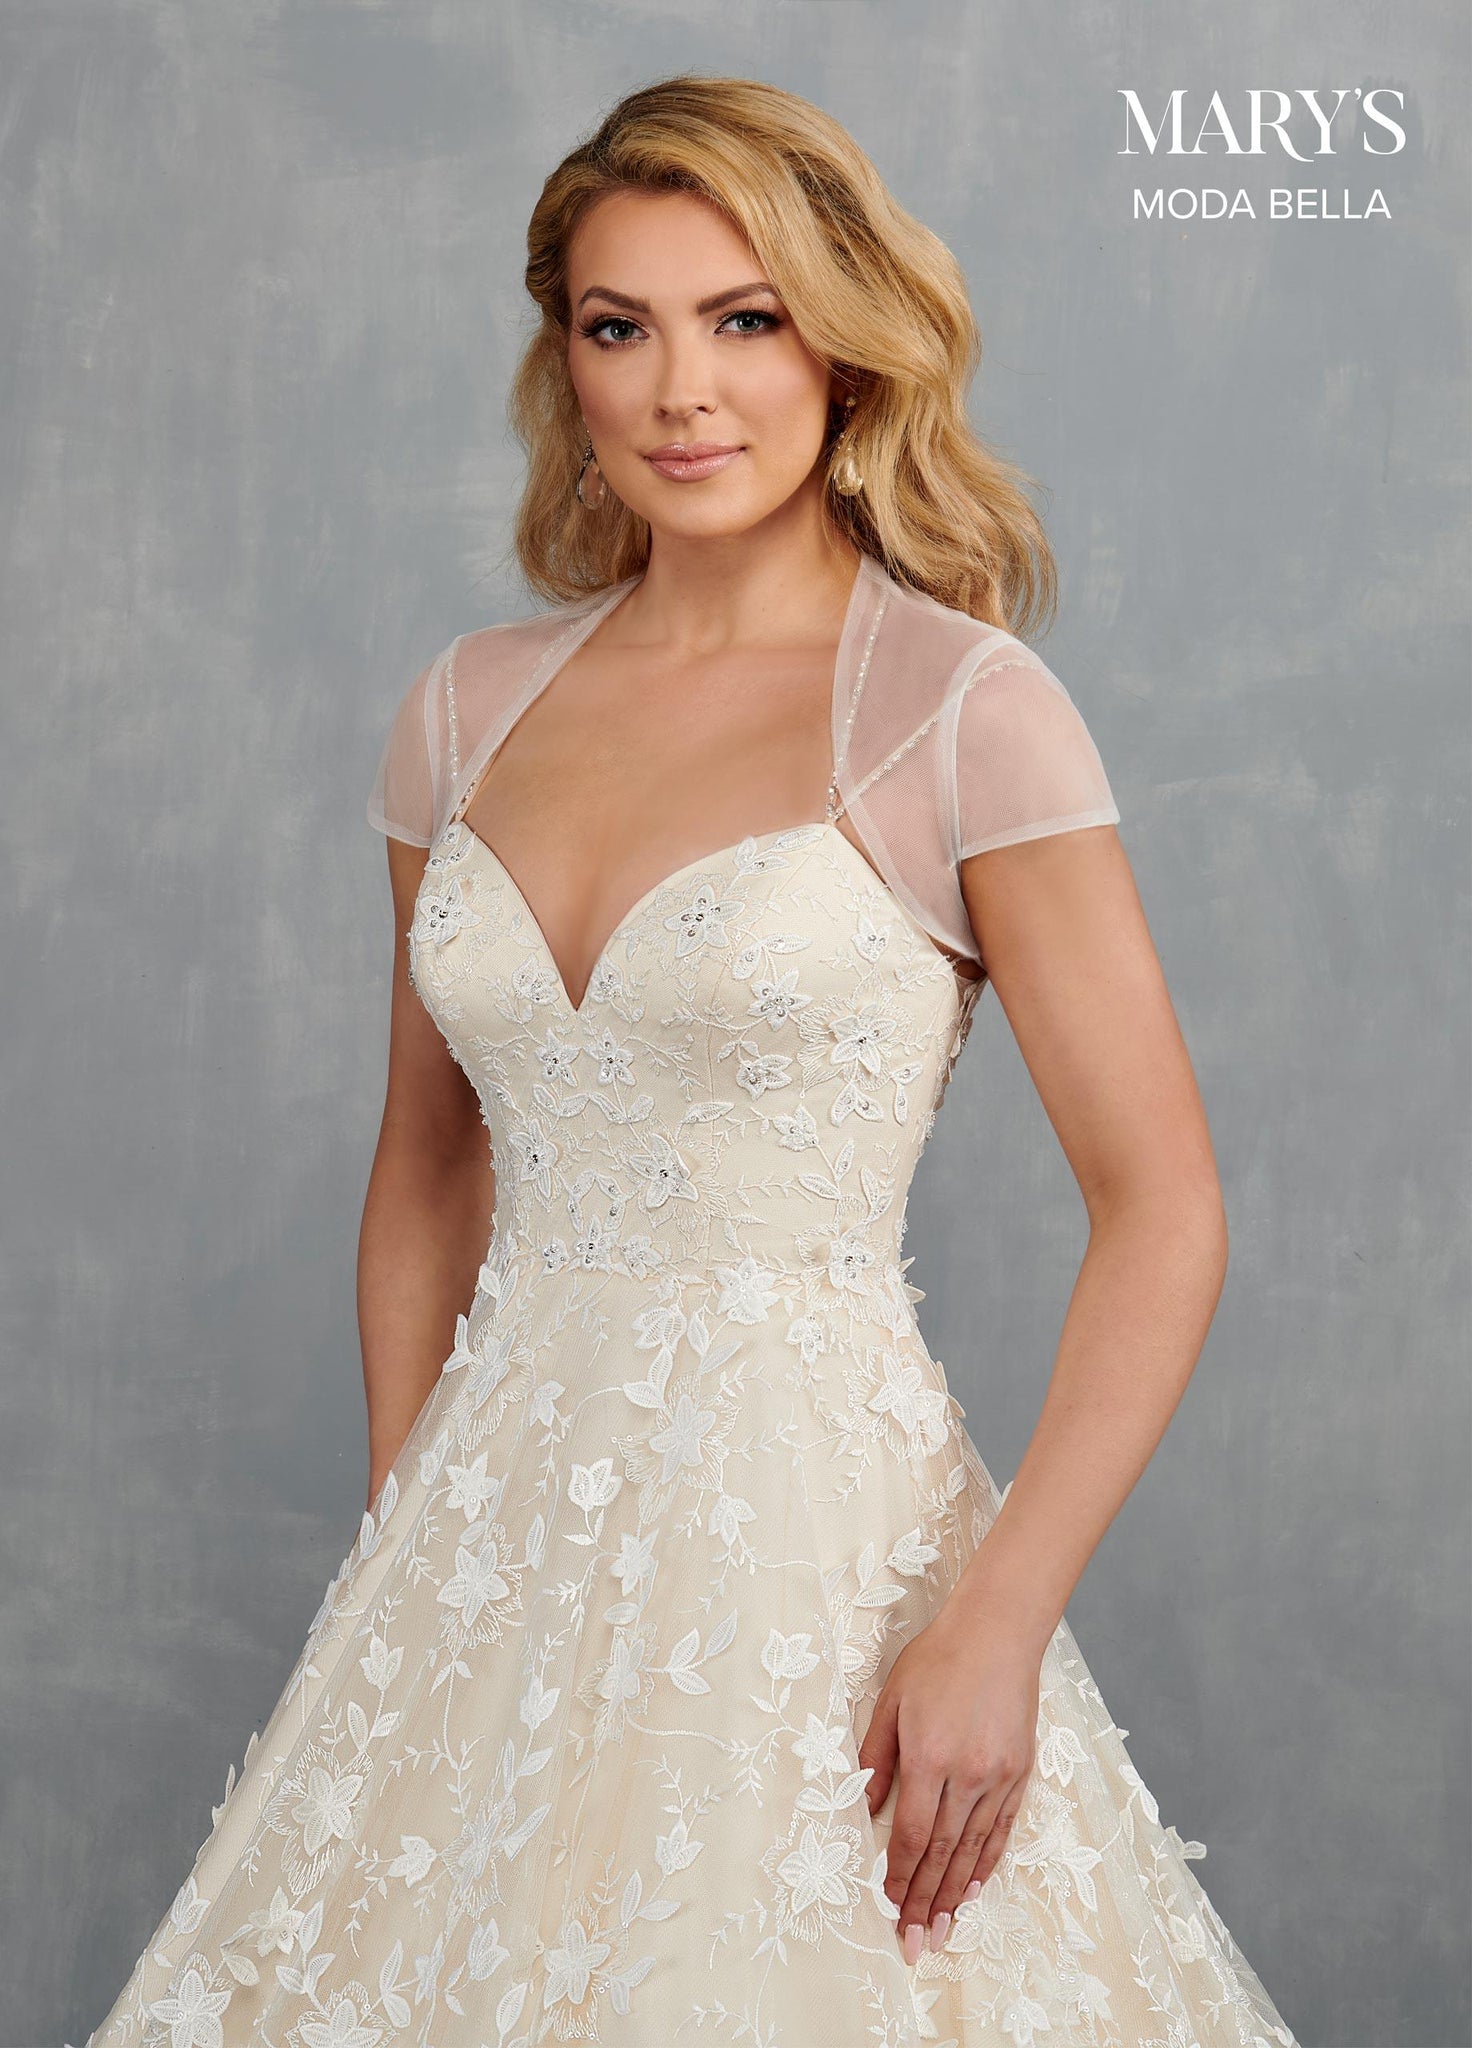 MARY'S BRIDAL - Florence - Adore Bridal and Occasion Wear